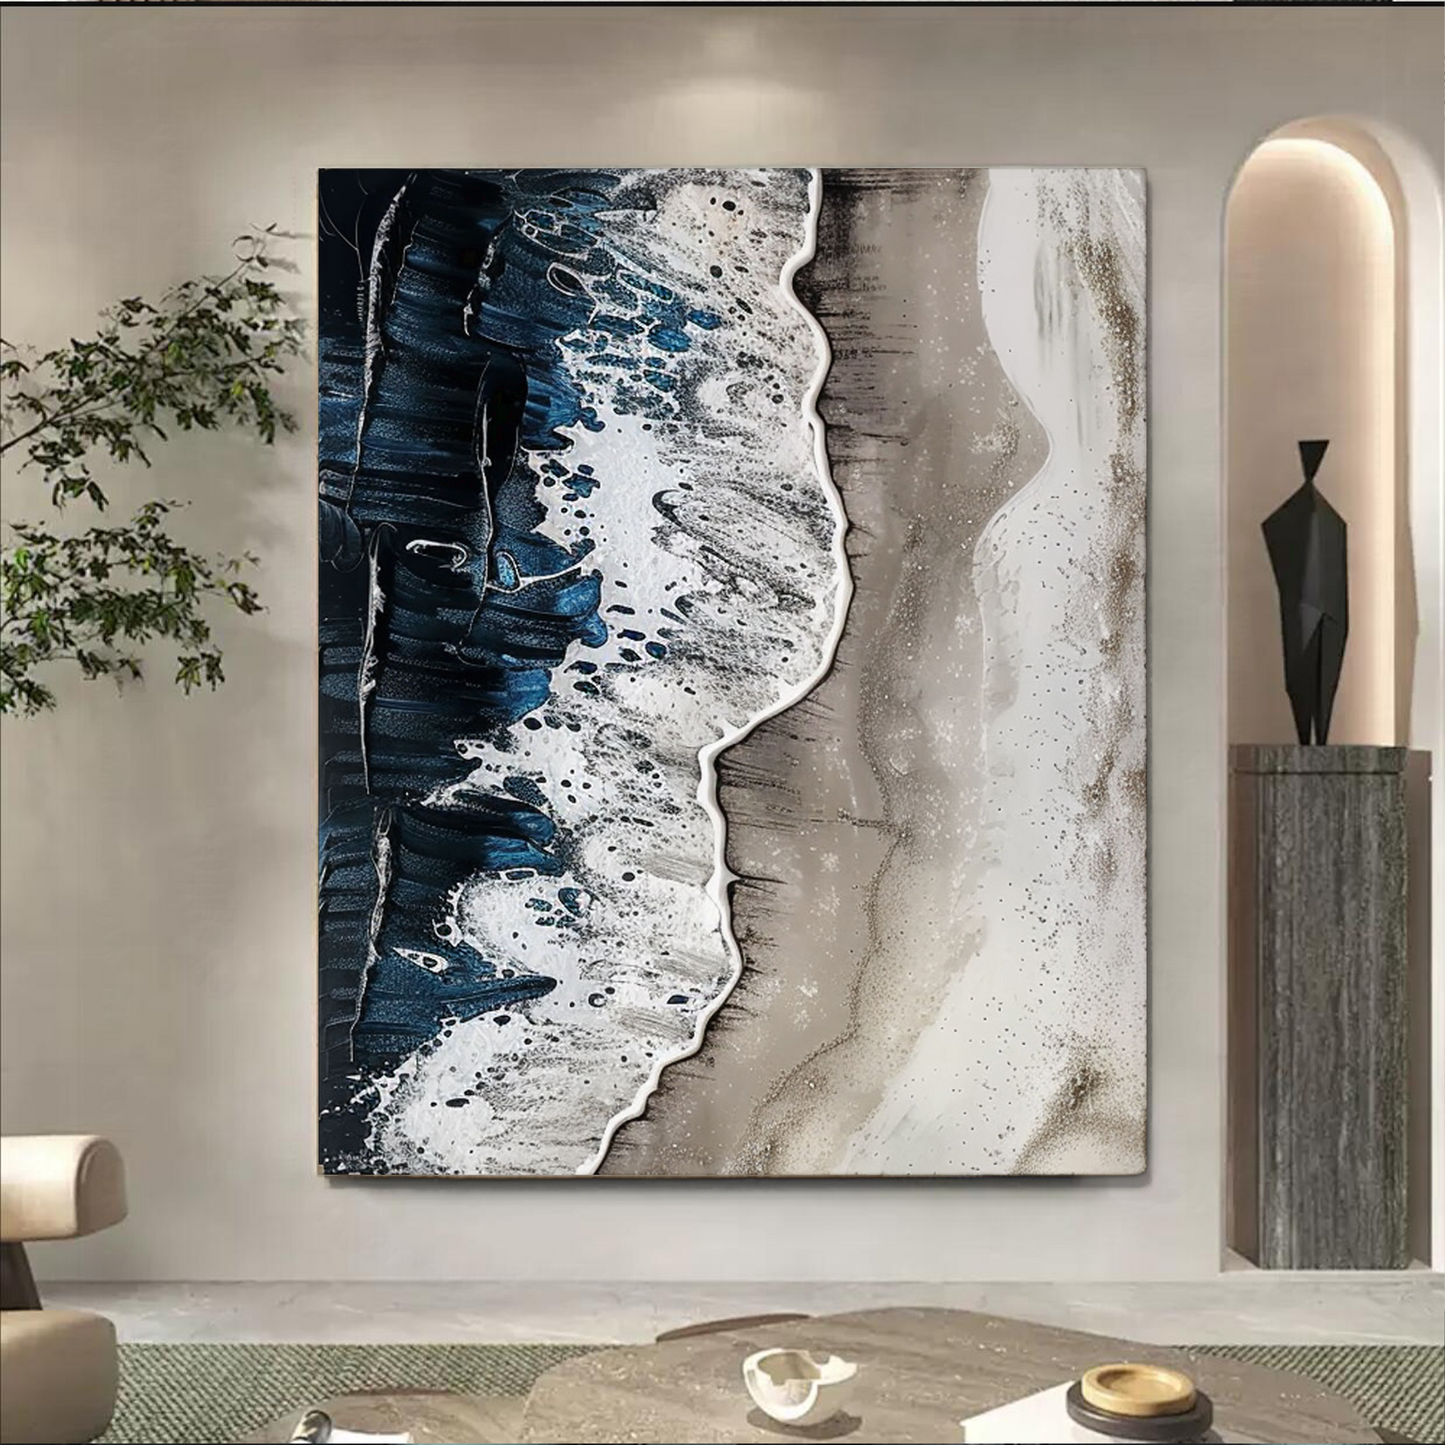 3D Textured Abstract Painting "Eternal Waves"